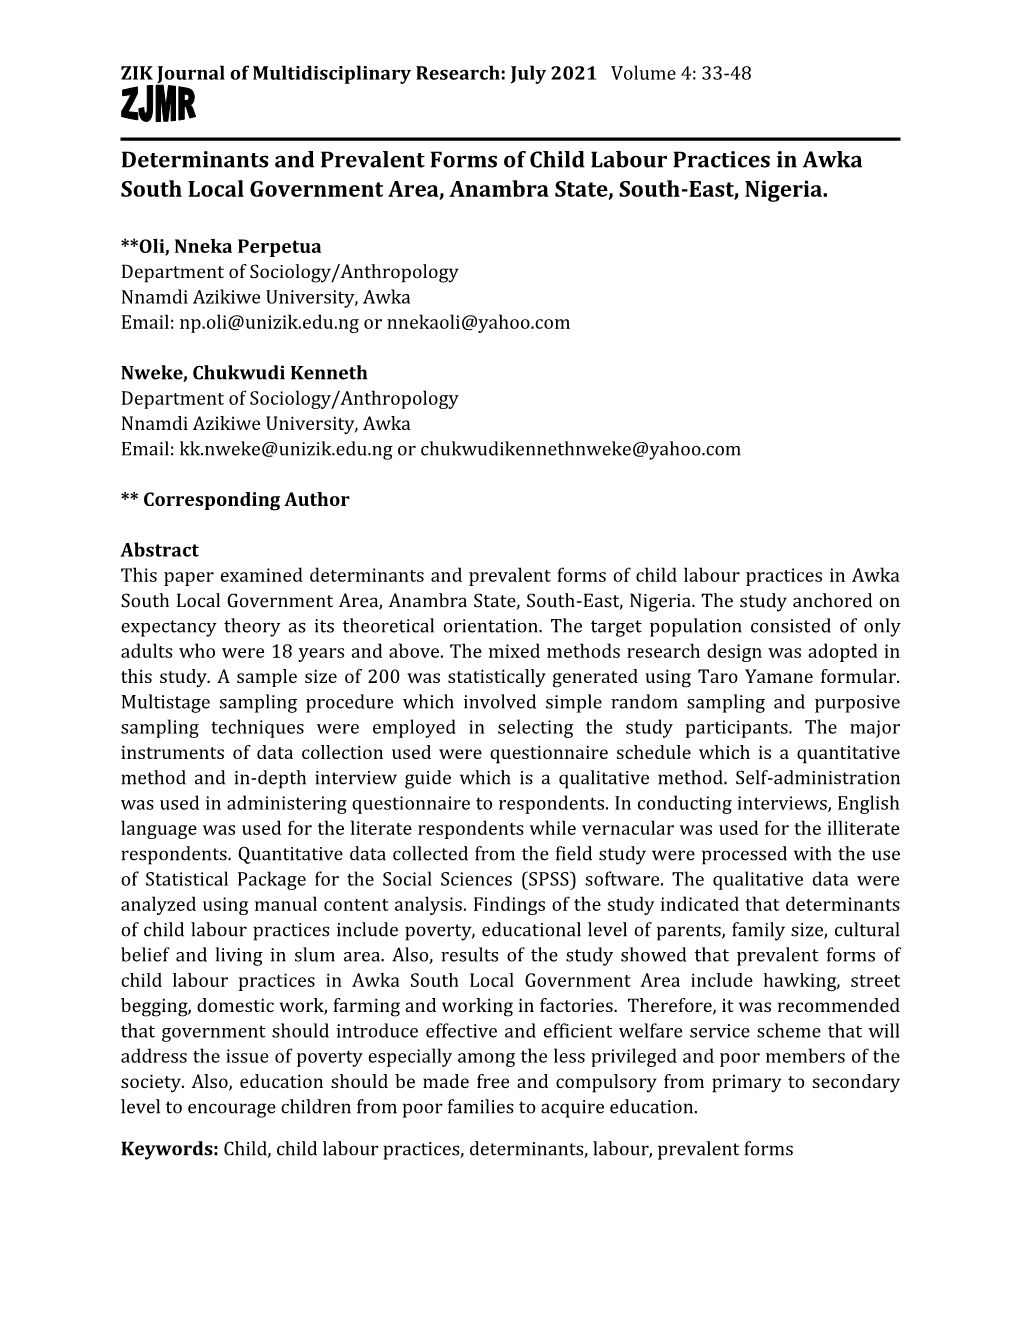 Determinants and Prevalent Forms of Child Labour Practices in Awka South Local Government Area, Anambra State, South-East, Nigeria